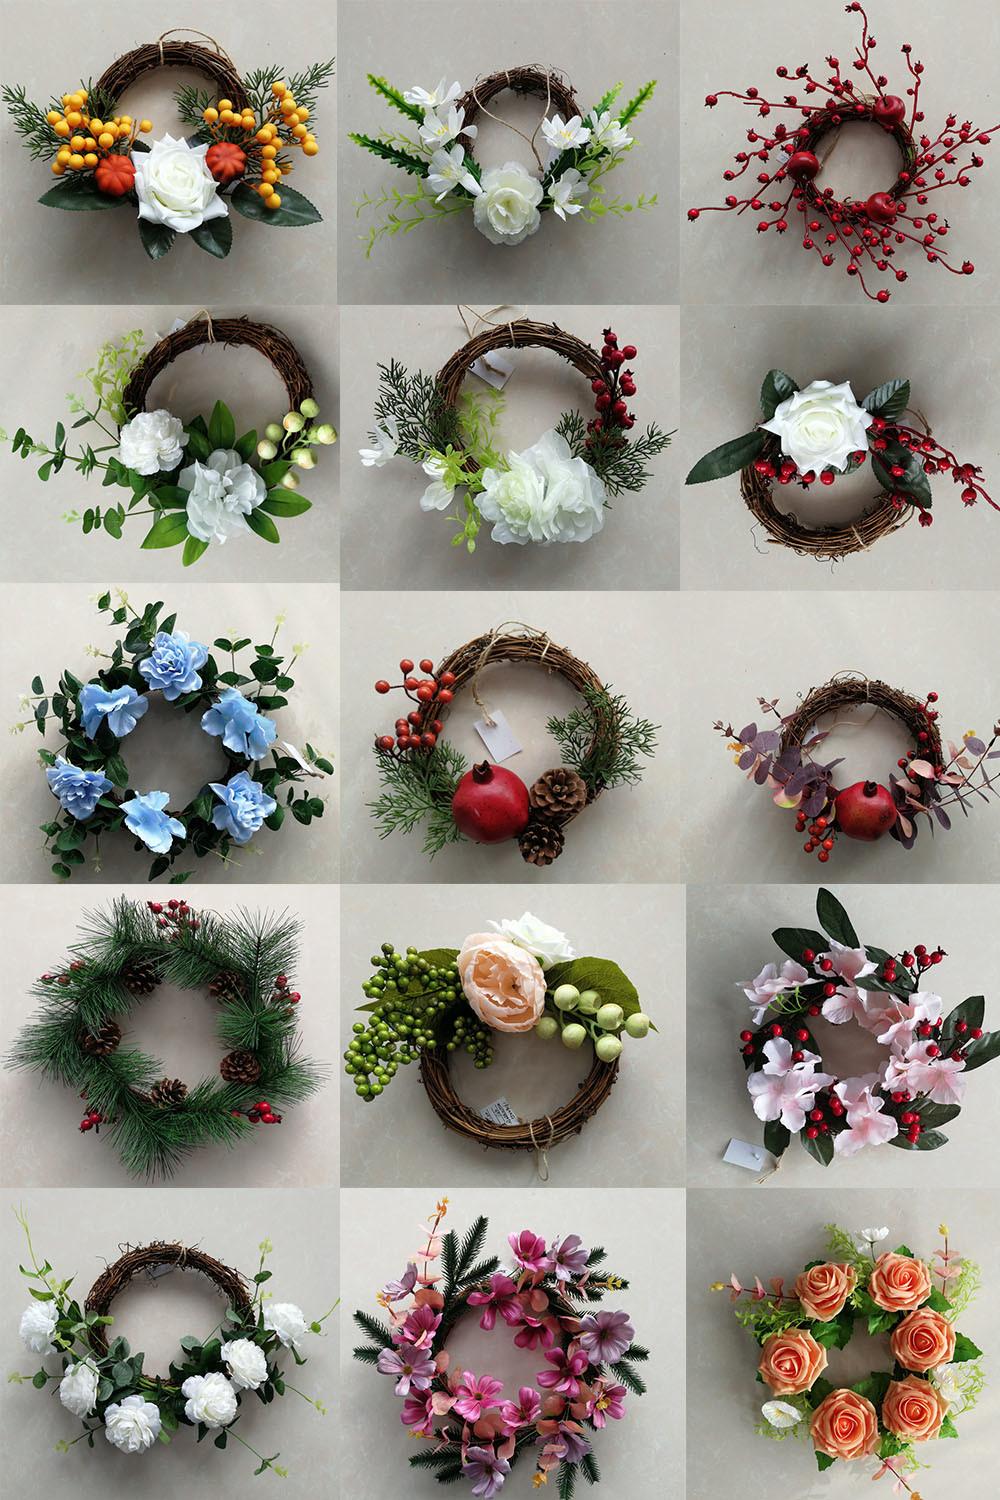 Plastic Artificial Xmas Wreath with Ornaments Decorate Home Decoration